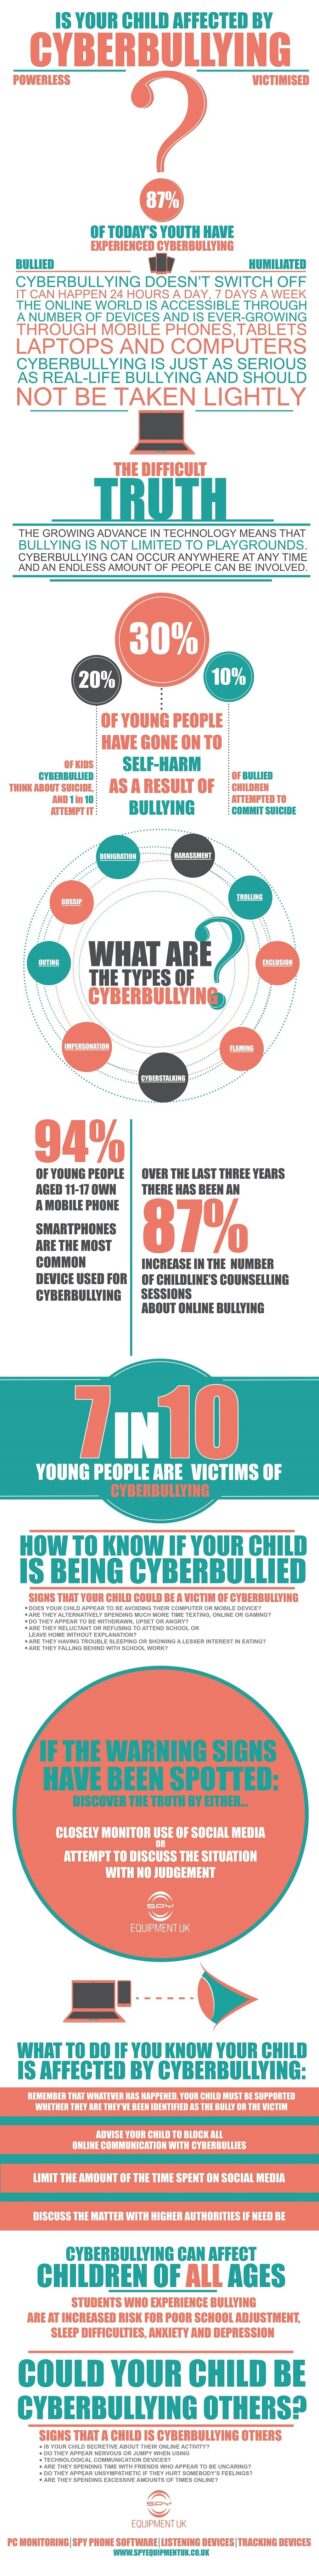 JMR Counseling: Cyberbullying and Teens Infographic